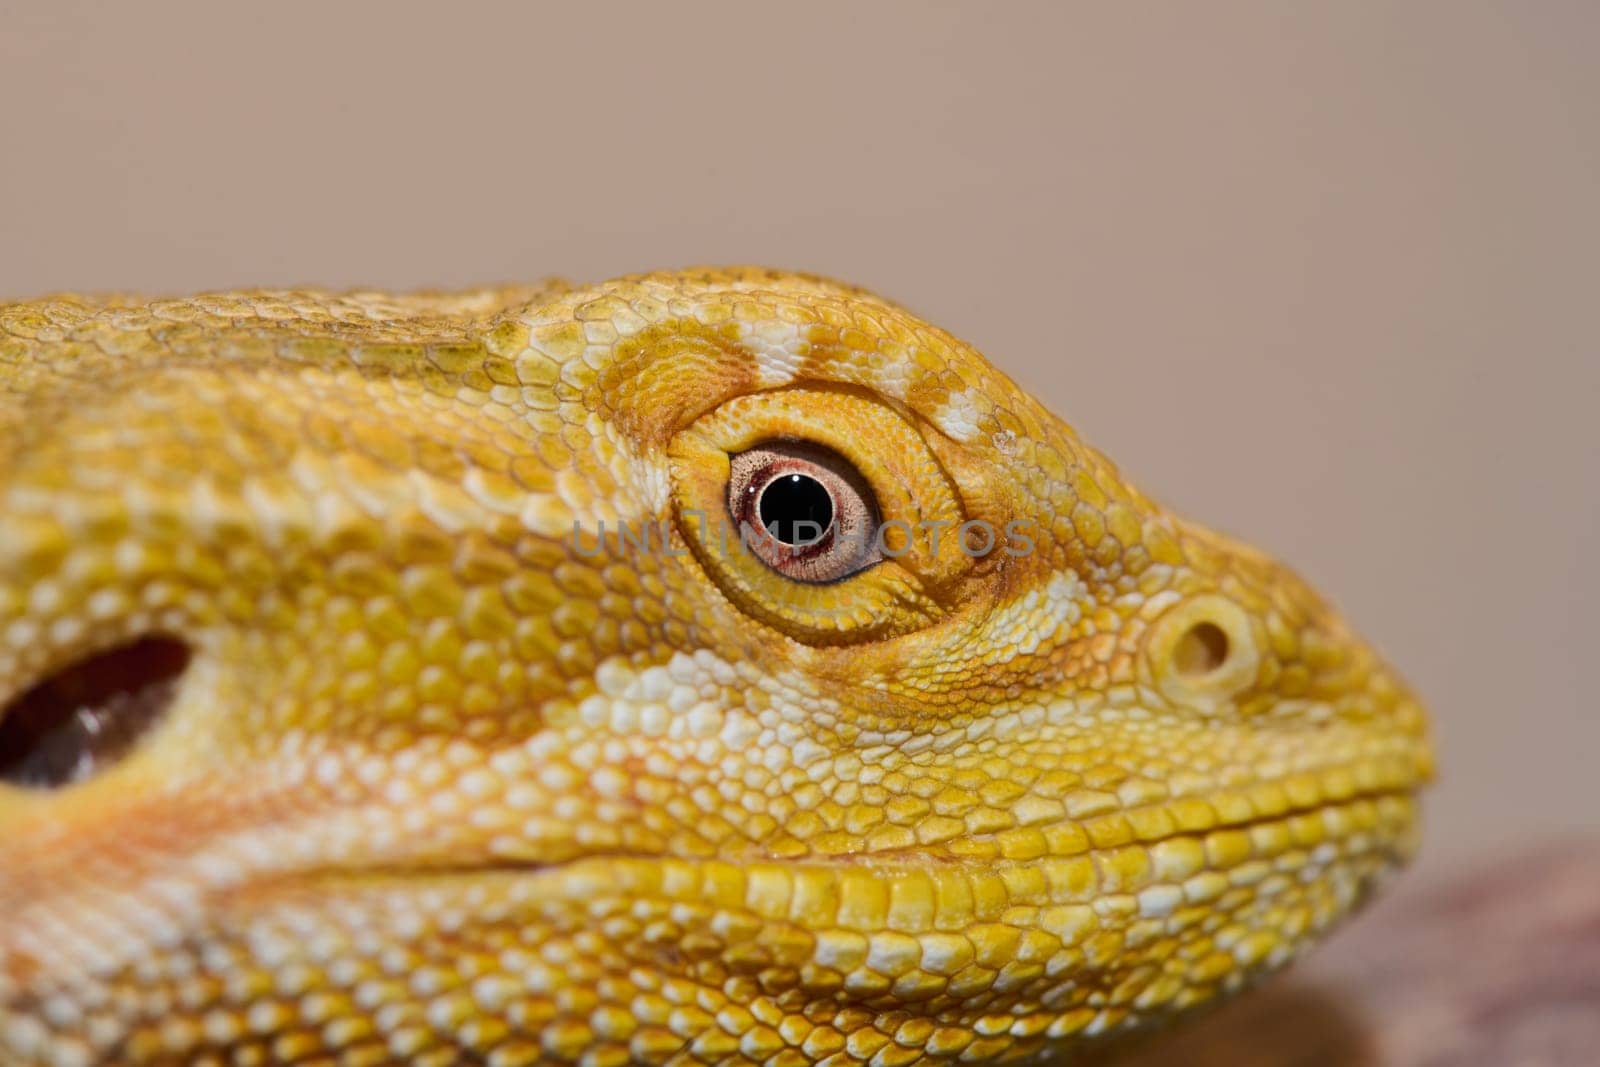 Bearded Dragon: A Close-Up Look at This Amazing Lizard by dotshock